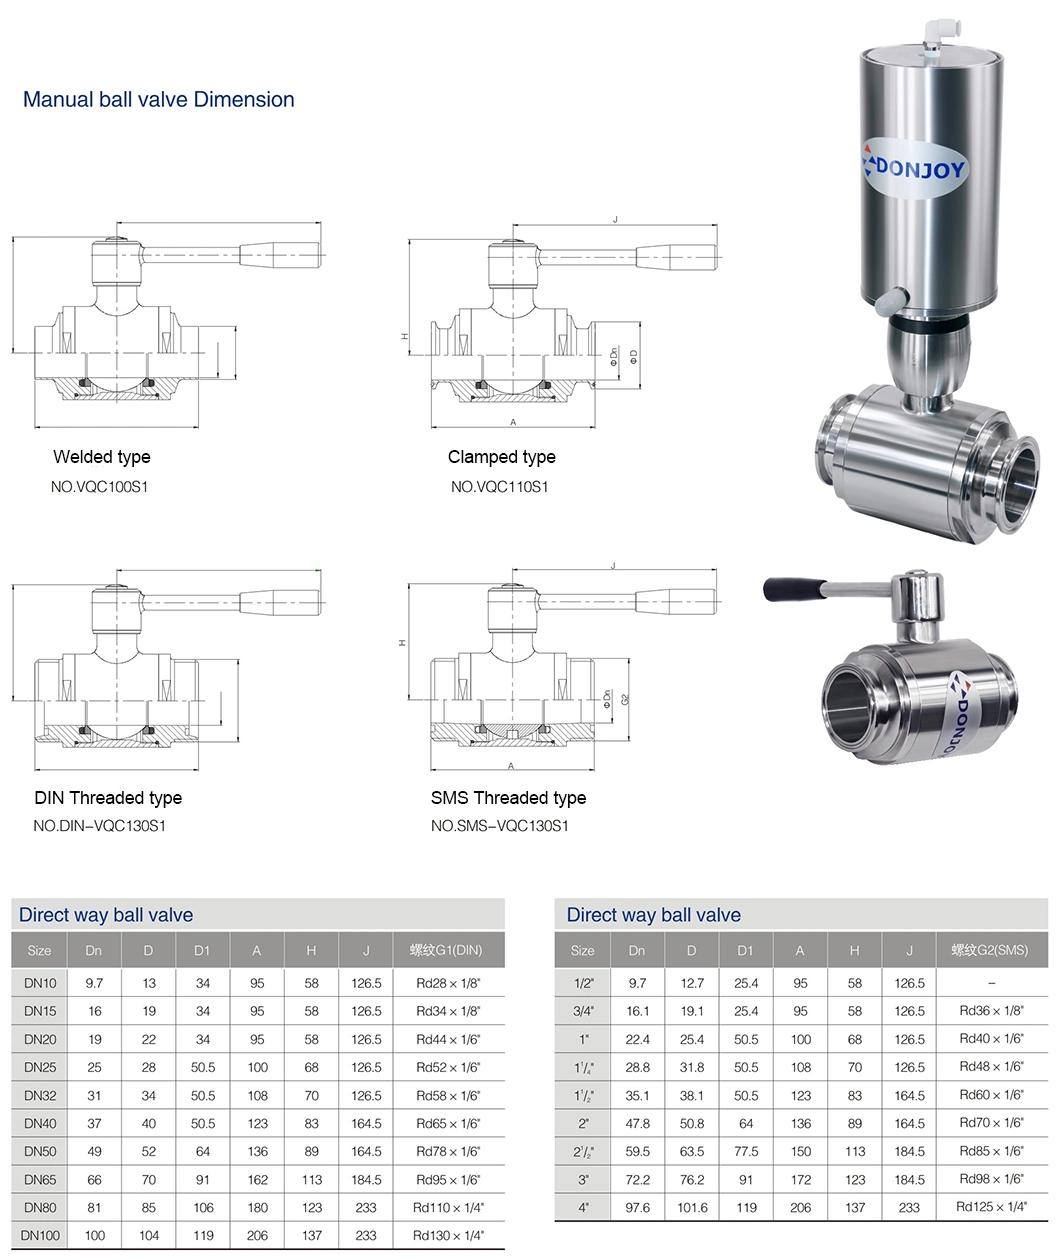 Donjou Sanitary Butterfly Ball Valve with Intelligent Positioner